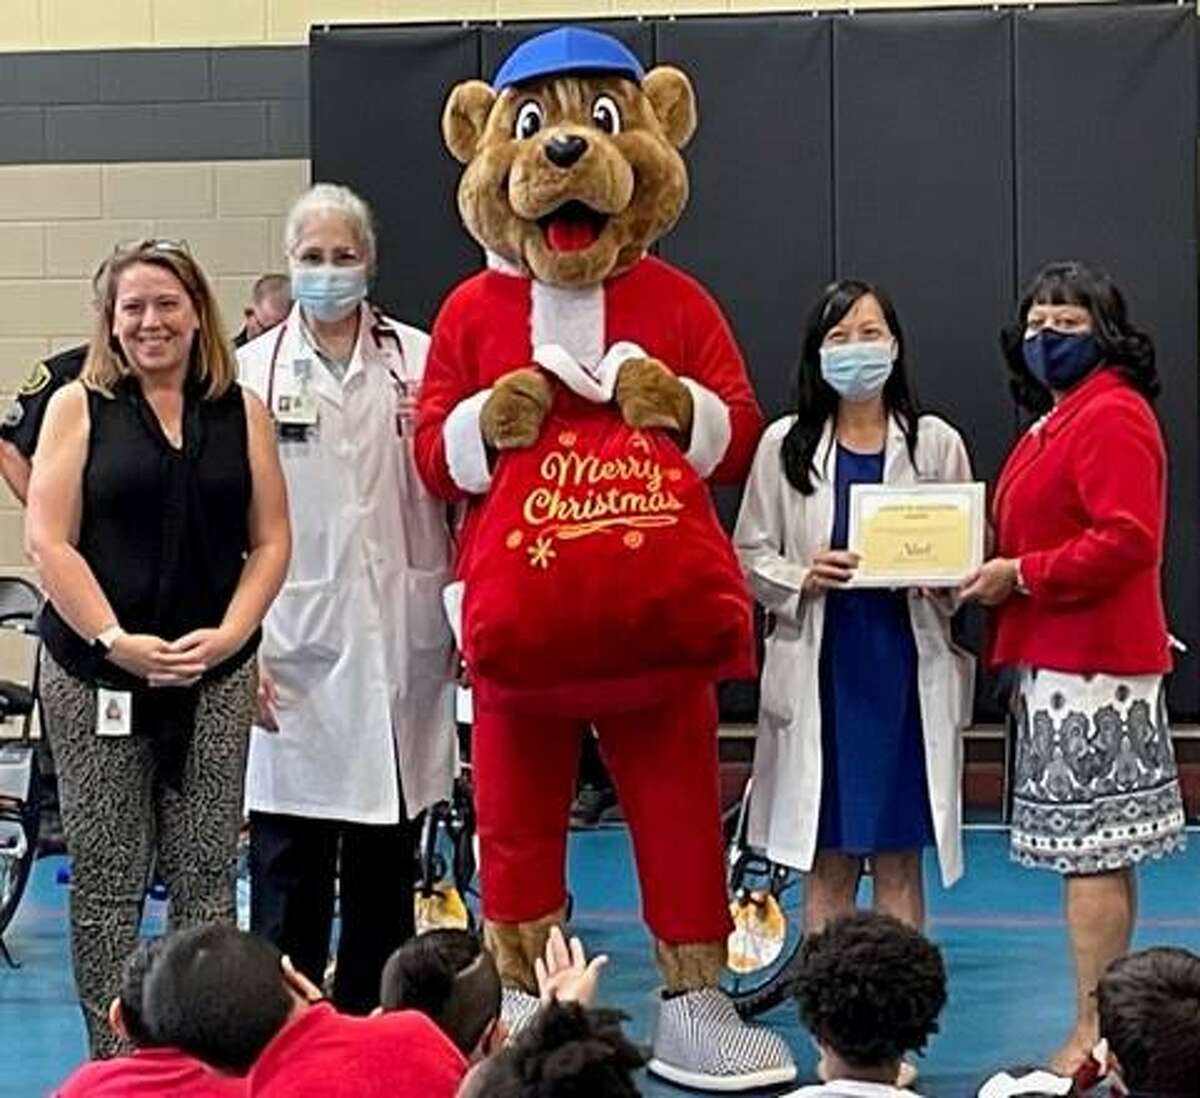 Kelsey Bear prepares to give teddy bears to Horn Elementary School students as part of the Houston Police Blue Santa Program benefiting children in underprivileged communities. From left are Mary Starling, principal, Horn Elementary School; Marina Ramirez, M.D., pediatrician, Kelsey-Seybold Clinic; Kelsey Bear; Jennifer Lai, M.D., pediatrician, Kelsey-Seybold Clinic; and Dee Jones, business and community coordinator, Alief ISD.